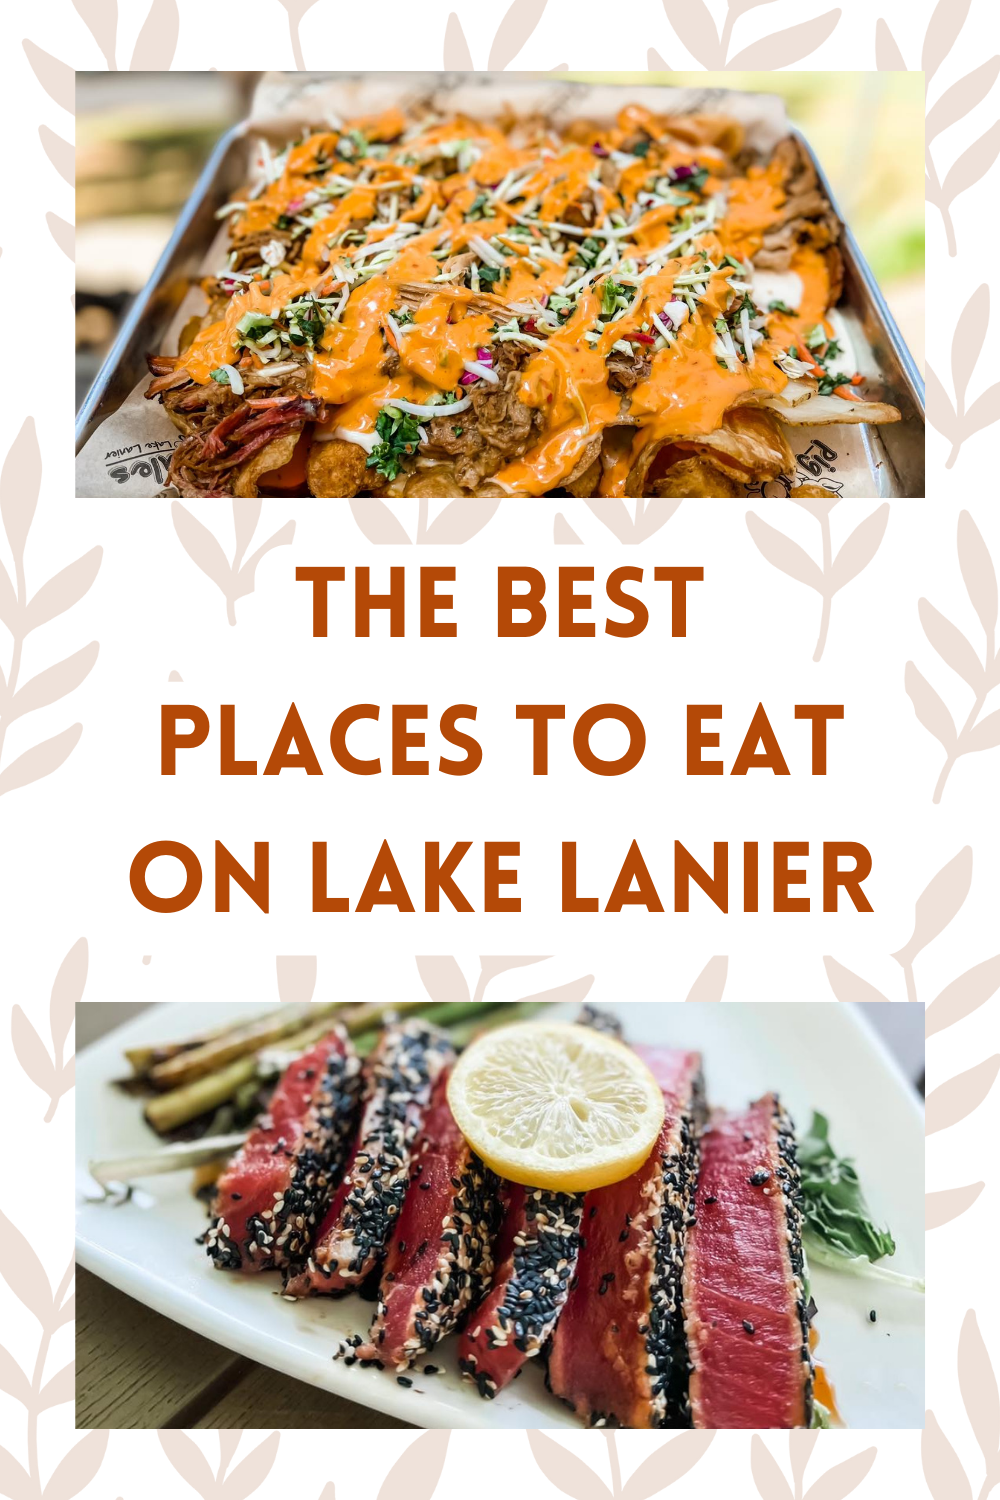 The best places to eat on lake lanier featuring the ahi tuna from fish tales and the smoked chicken nachos from pig tales